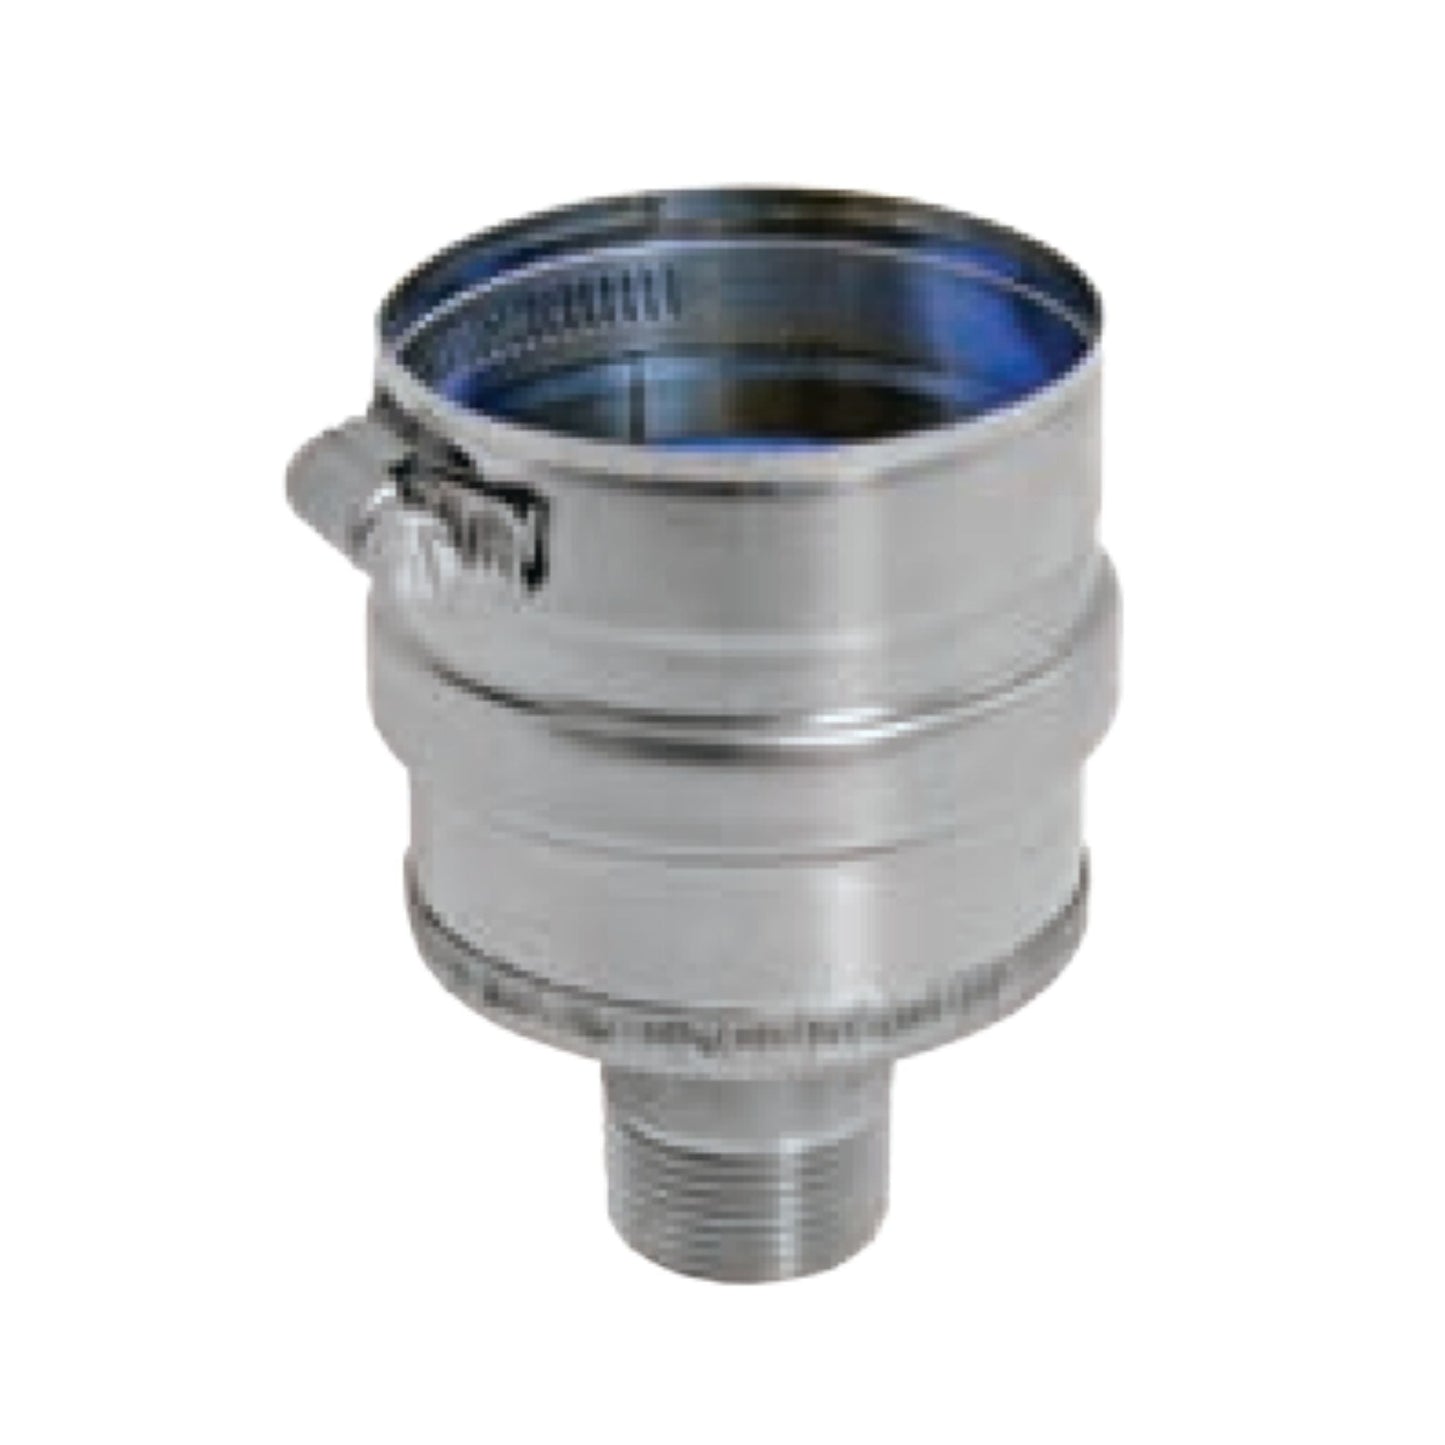 DuraVent FasNSeal 12" 29-4C Stainless Steel IPS Drain Fitting